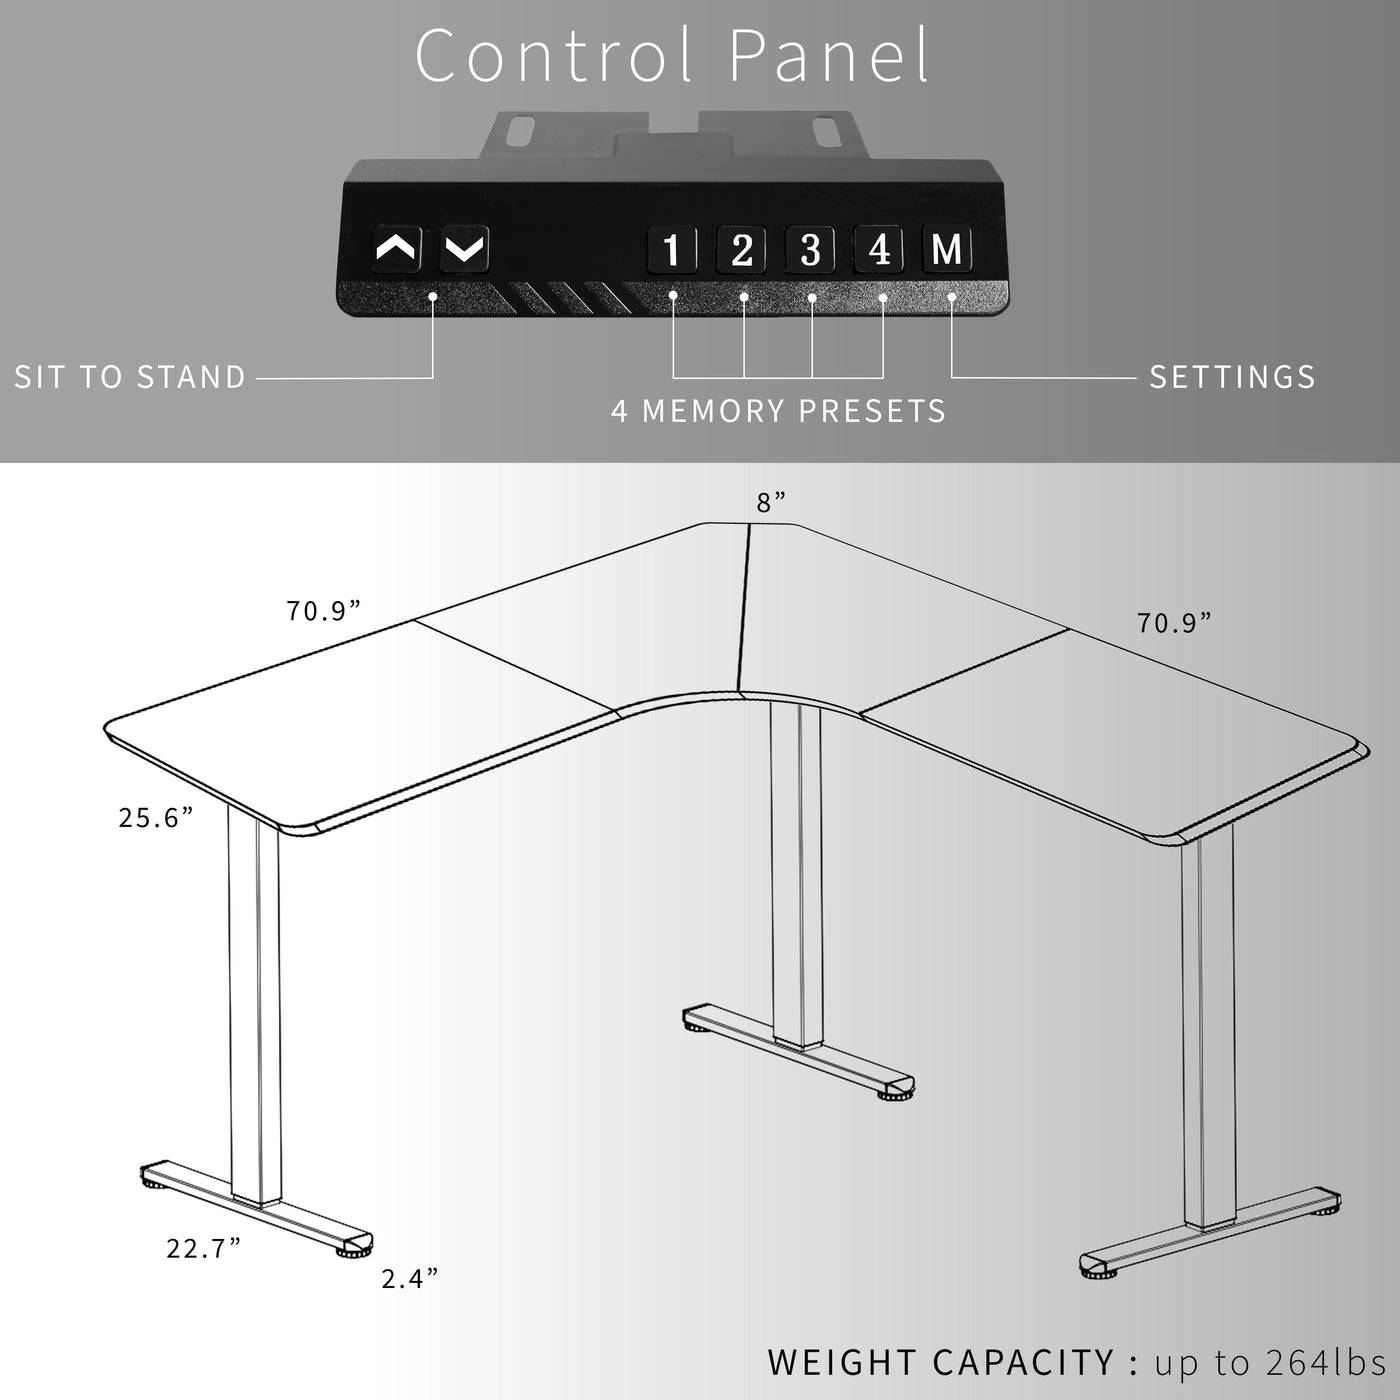 Control panel featuring four memory presets showcasing large tabletop surface area.